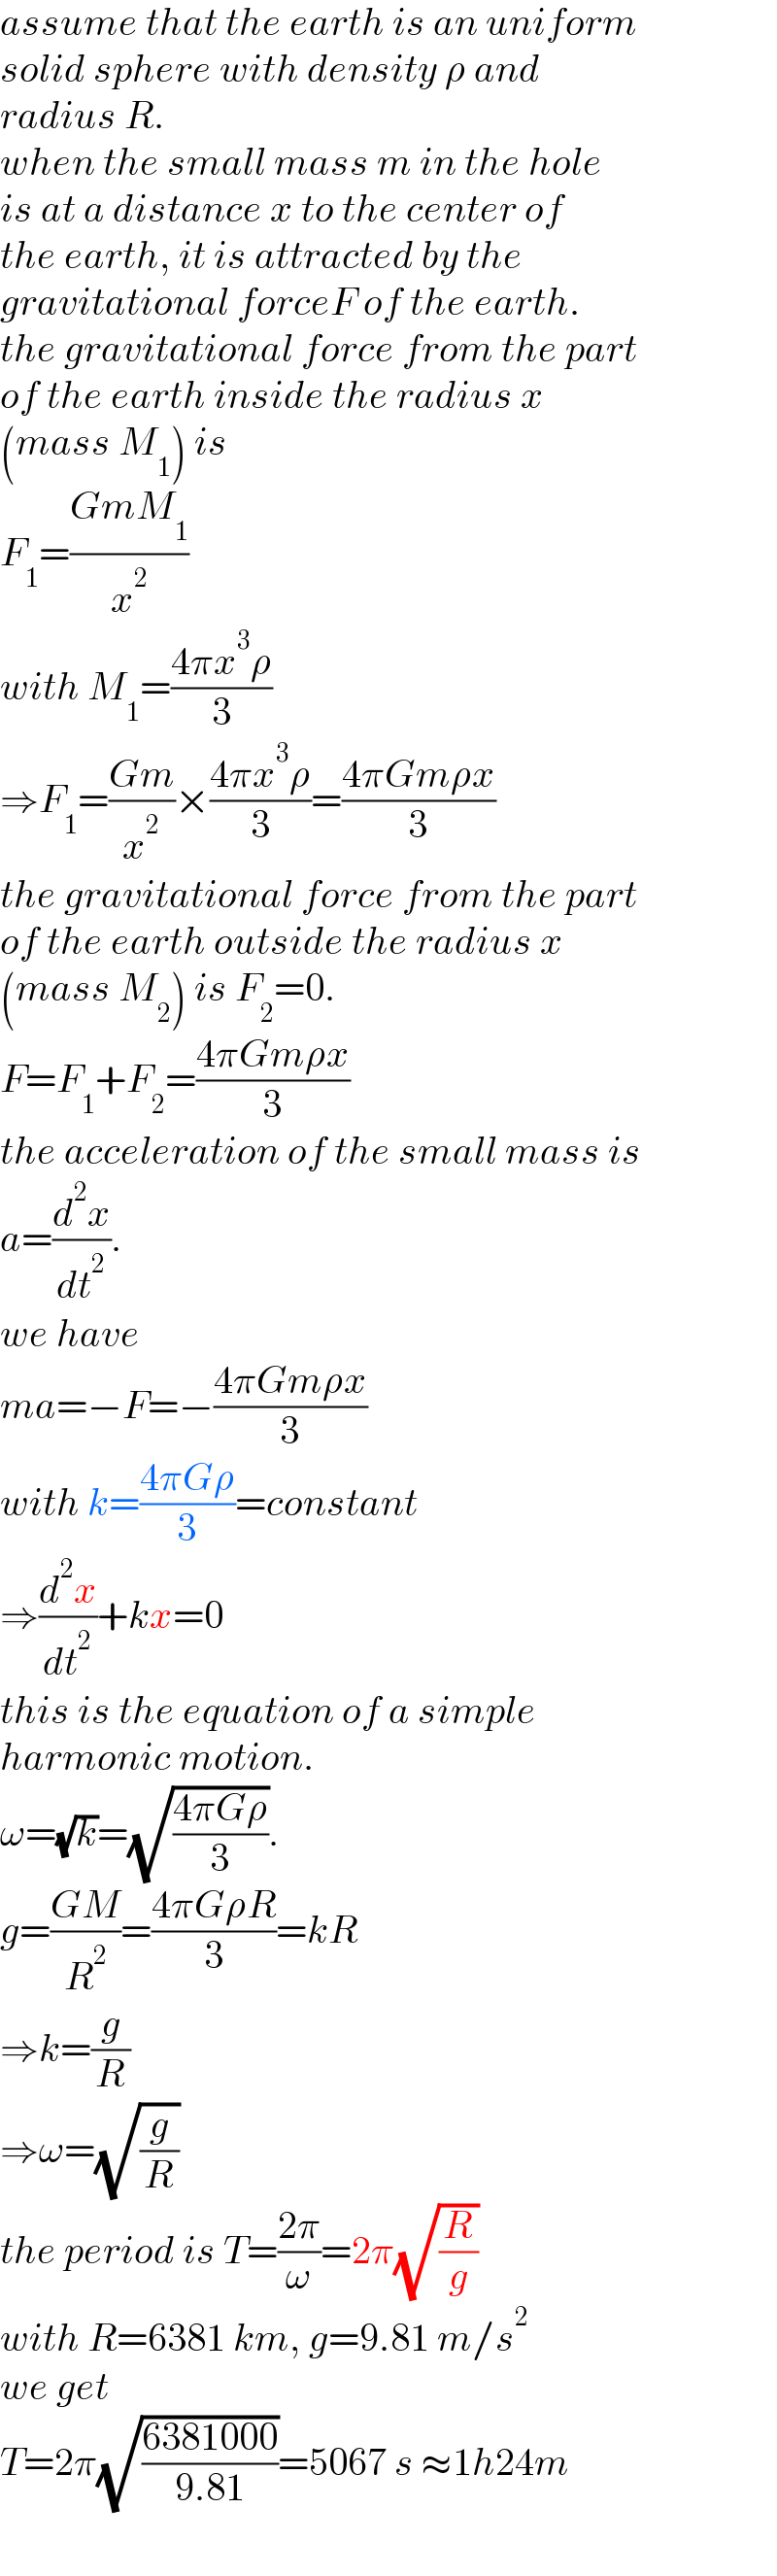 assume that the earth is an uniform  solid sphere with density ρ and   radius R.  when the small mass m in the hole  is at a distance x to the center of  the earth, it is attracted by the  gravitational forceF of the earth.  the gravitational force from the part  of the earth inside the radius x   (mass M_1 ) is  F_1 =((GmM_1 )/x^2 )  with M_1 =((4πx^3 ρ)/3)  ⇒F_1 =((Gm)/x^2 )×((4πx^3 ρ)/3)=((4πGmρx)/3)  the gravitational force from the part  of the earth outside the radius x  (mass M_2 ) is F_2 =0.  F=F_1 +F_2 =((4πGmρx)/3)  the acceleration of the small mass is  a=(d^2 x/dt^2 ).  we have  ma=−F=−((4πGmρx)/3)  with k=((4πGρ)/3)=constant  ⇒(d^2 x/dt^2 )+kx=0  this is the equation of a simple  harmonic motion.  ω=(√k)=(√((4πGρ)/3)).  g=((GM)/R^2 )=((4πGρR)/3)=kR  ⇒k=(g/R)  ⇒ω=(√(g/R))  the period is T=((2π)/ω)=2π(√(R/g))  with R=6381 km, g=9.81 m/s^2   we get   T=2π(√((6381000)/(9.81)))=5067 s ≈1h24m  